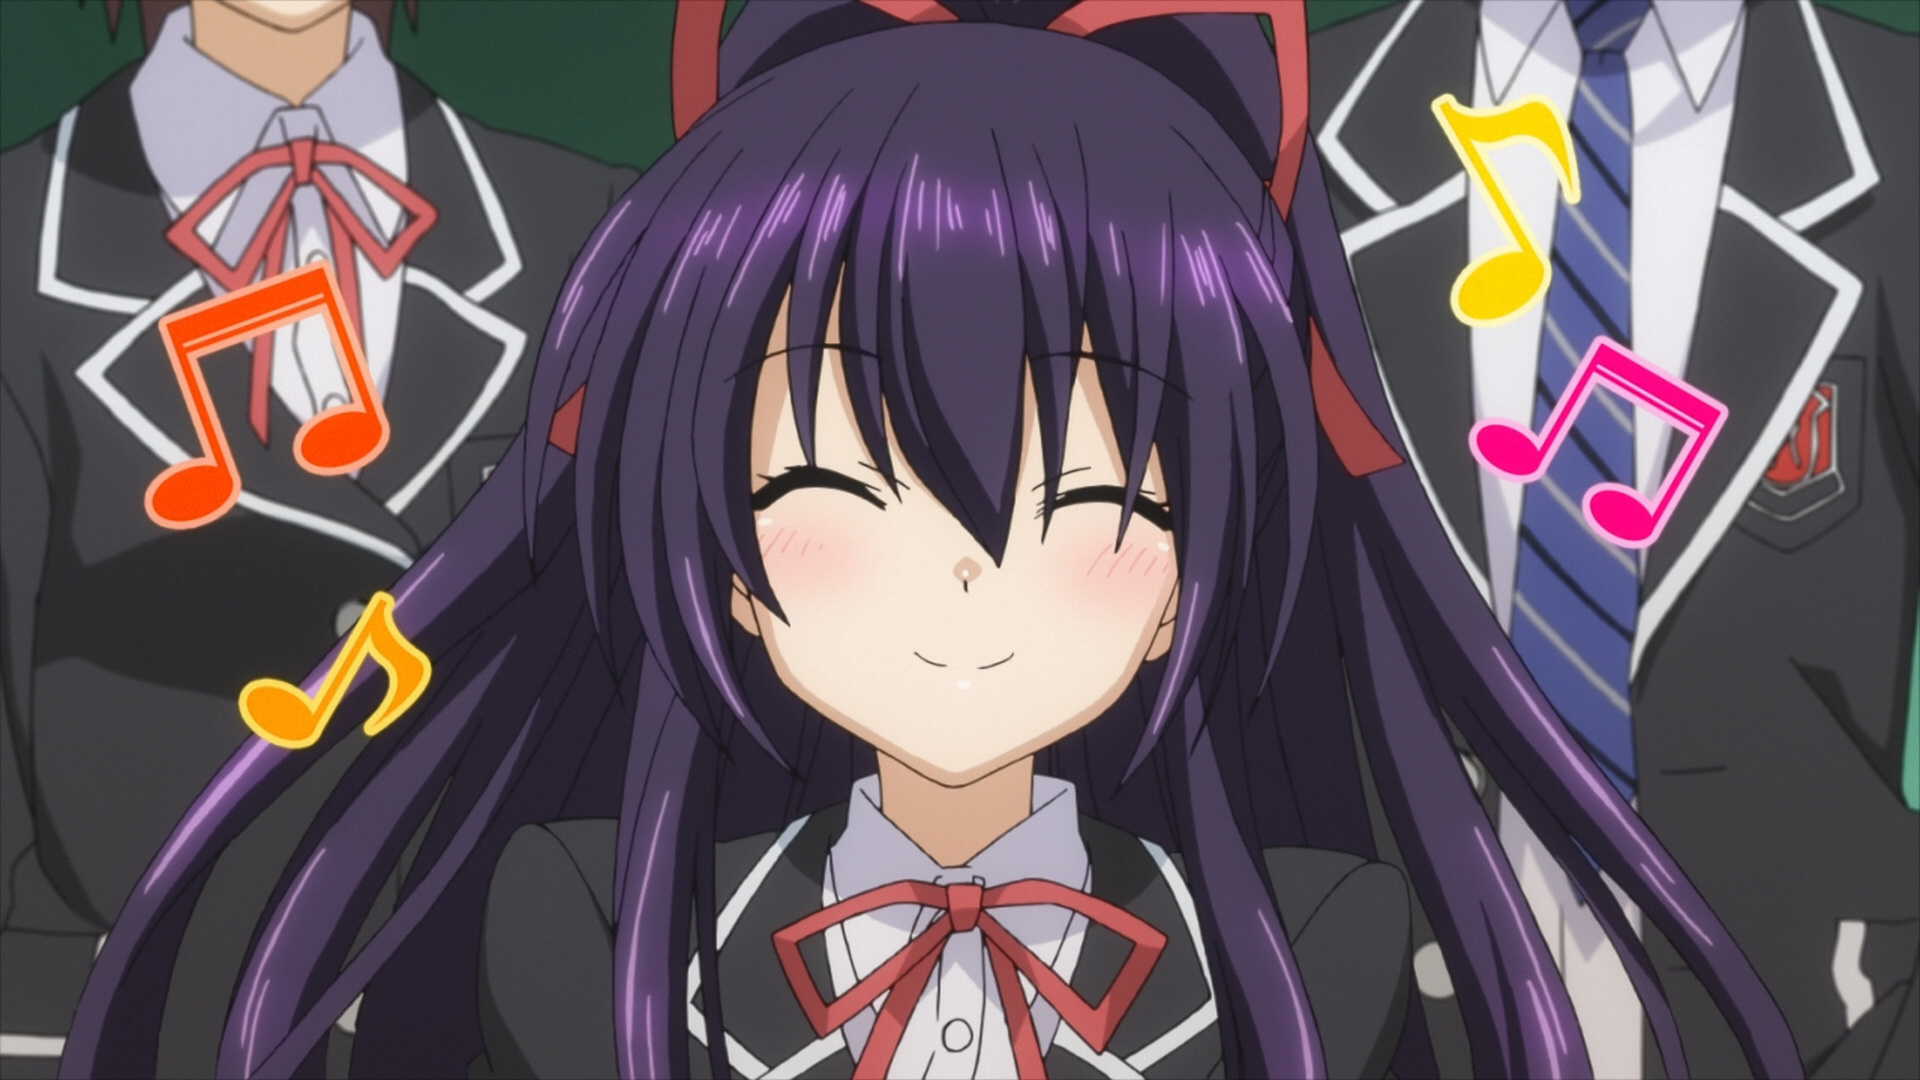 Once more, the best part about Date A Live is simply the dates. 